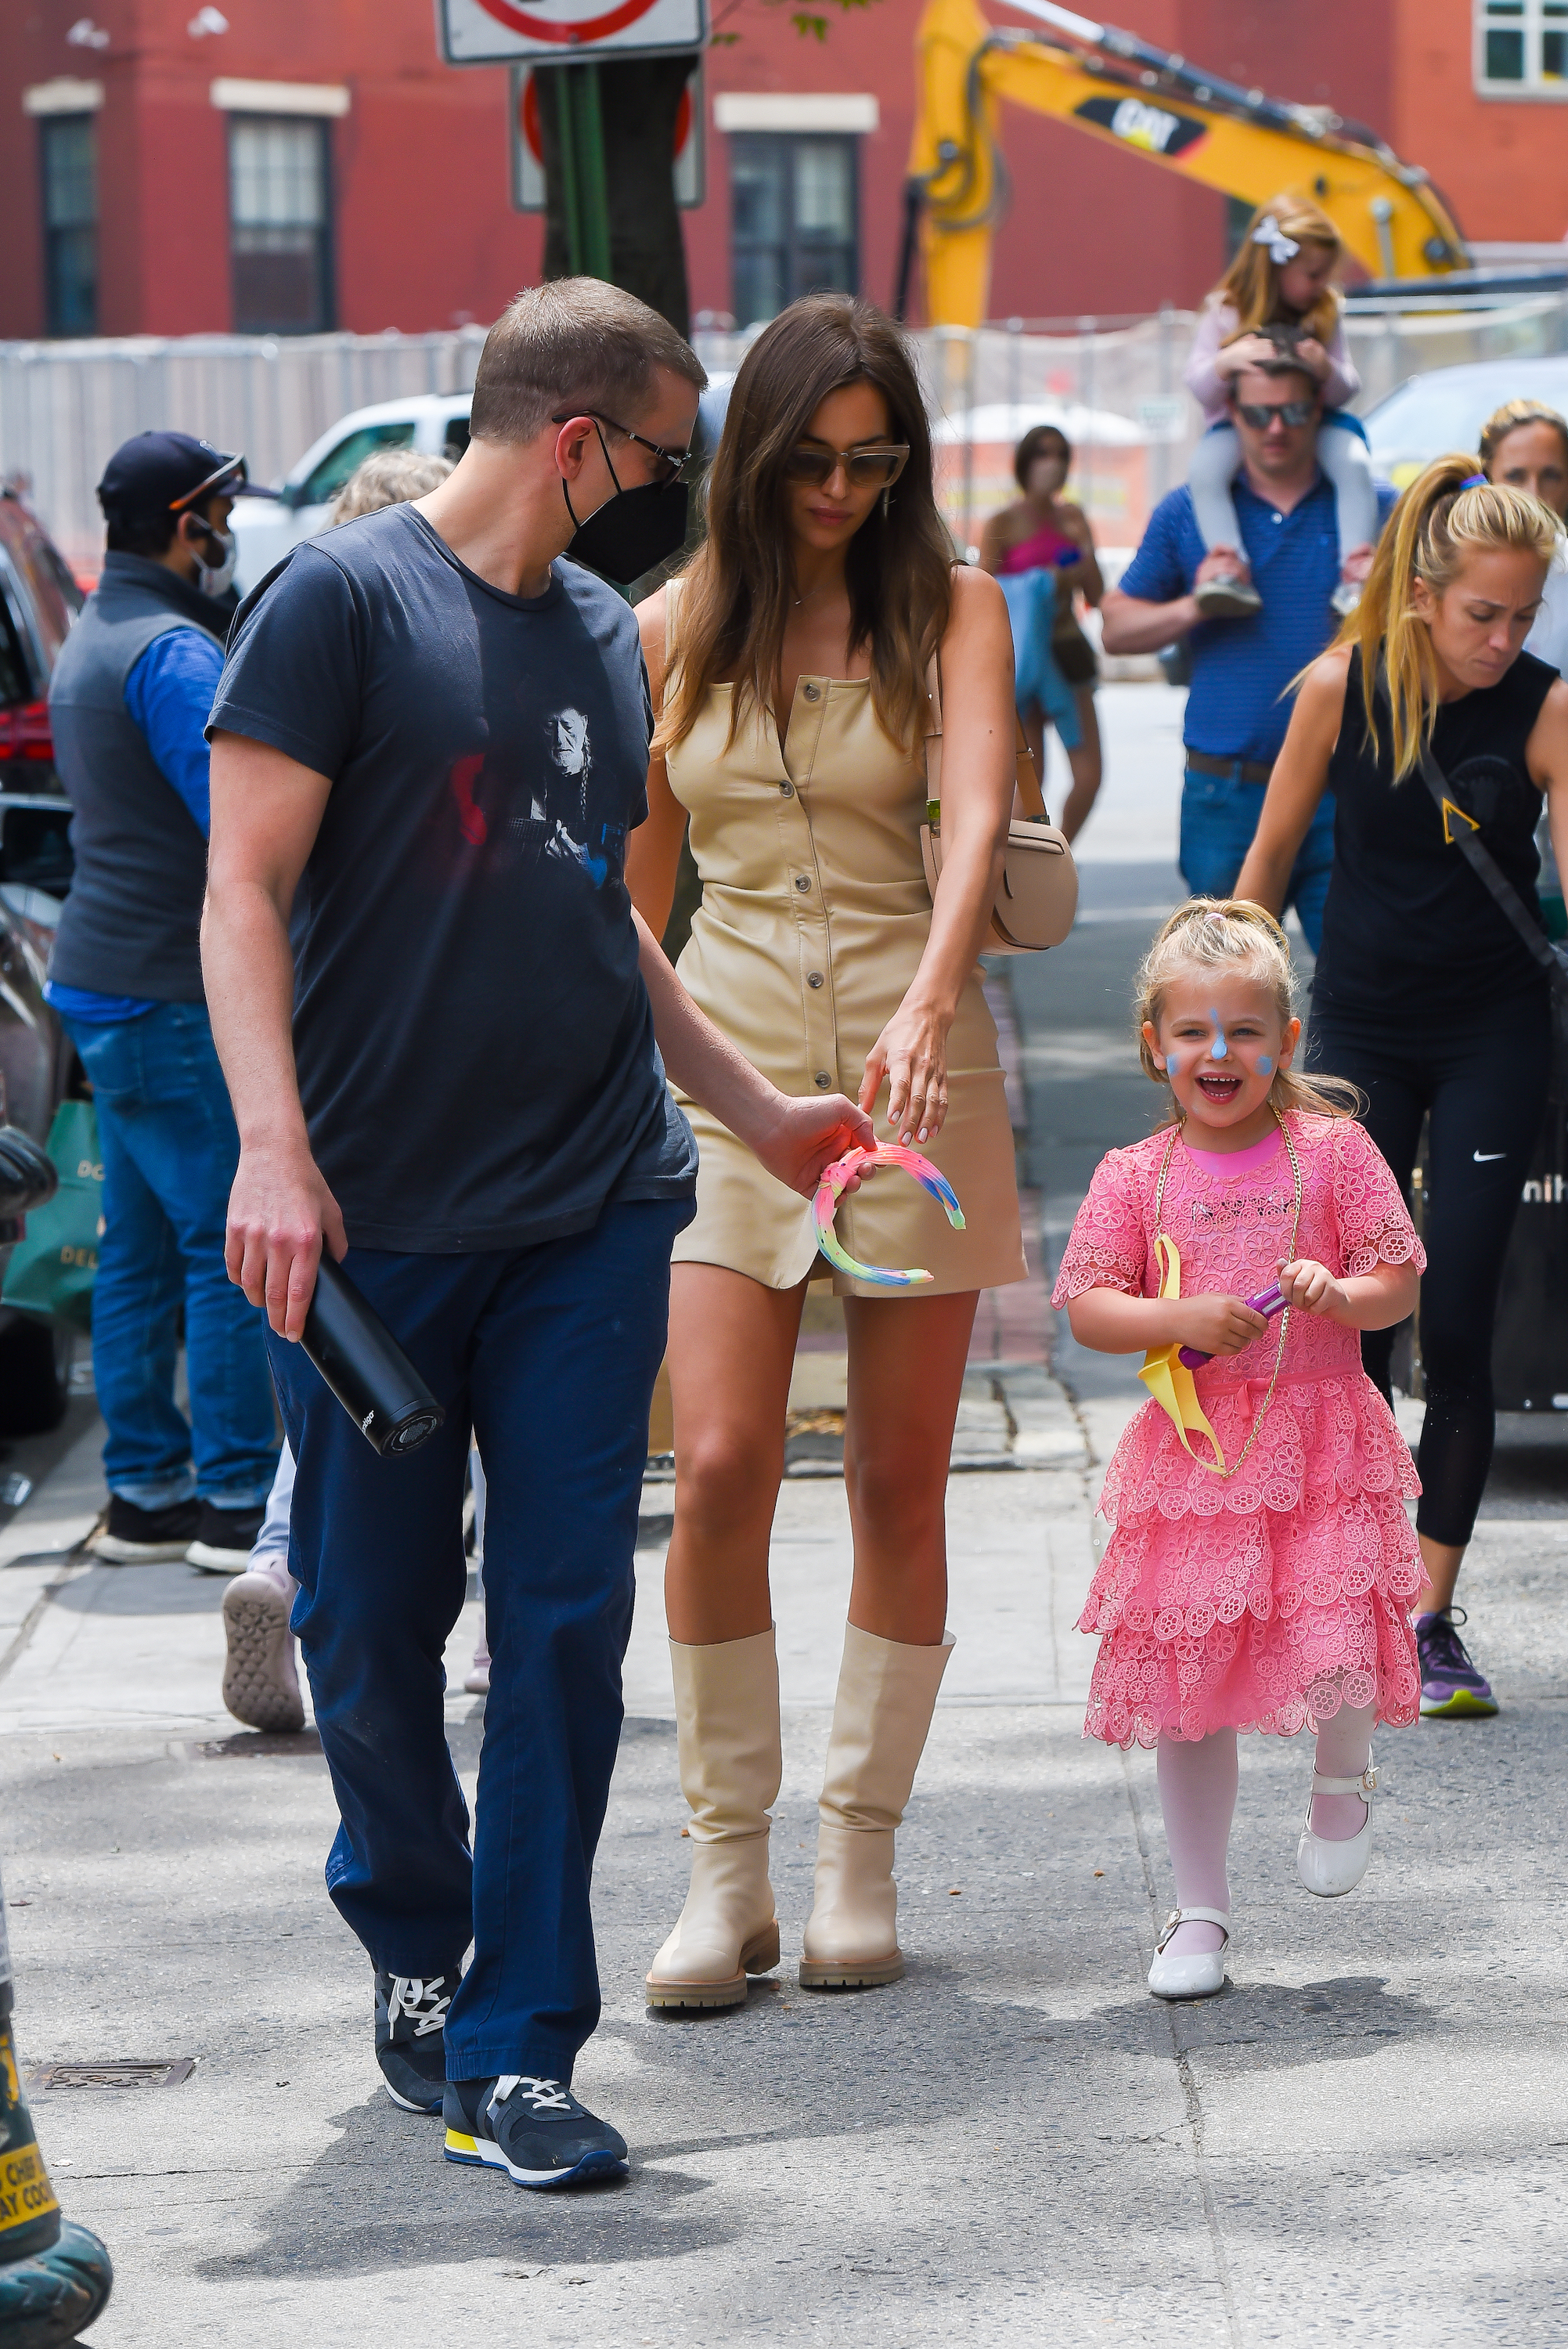 Bradley Cooper, Irina Shayk and their daughter Lea Cooper in Manhattan on June 02, 2021 in New York City. | Source: Getty Images